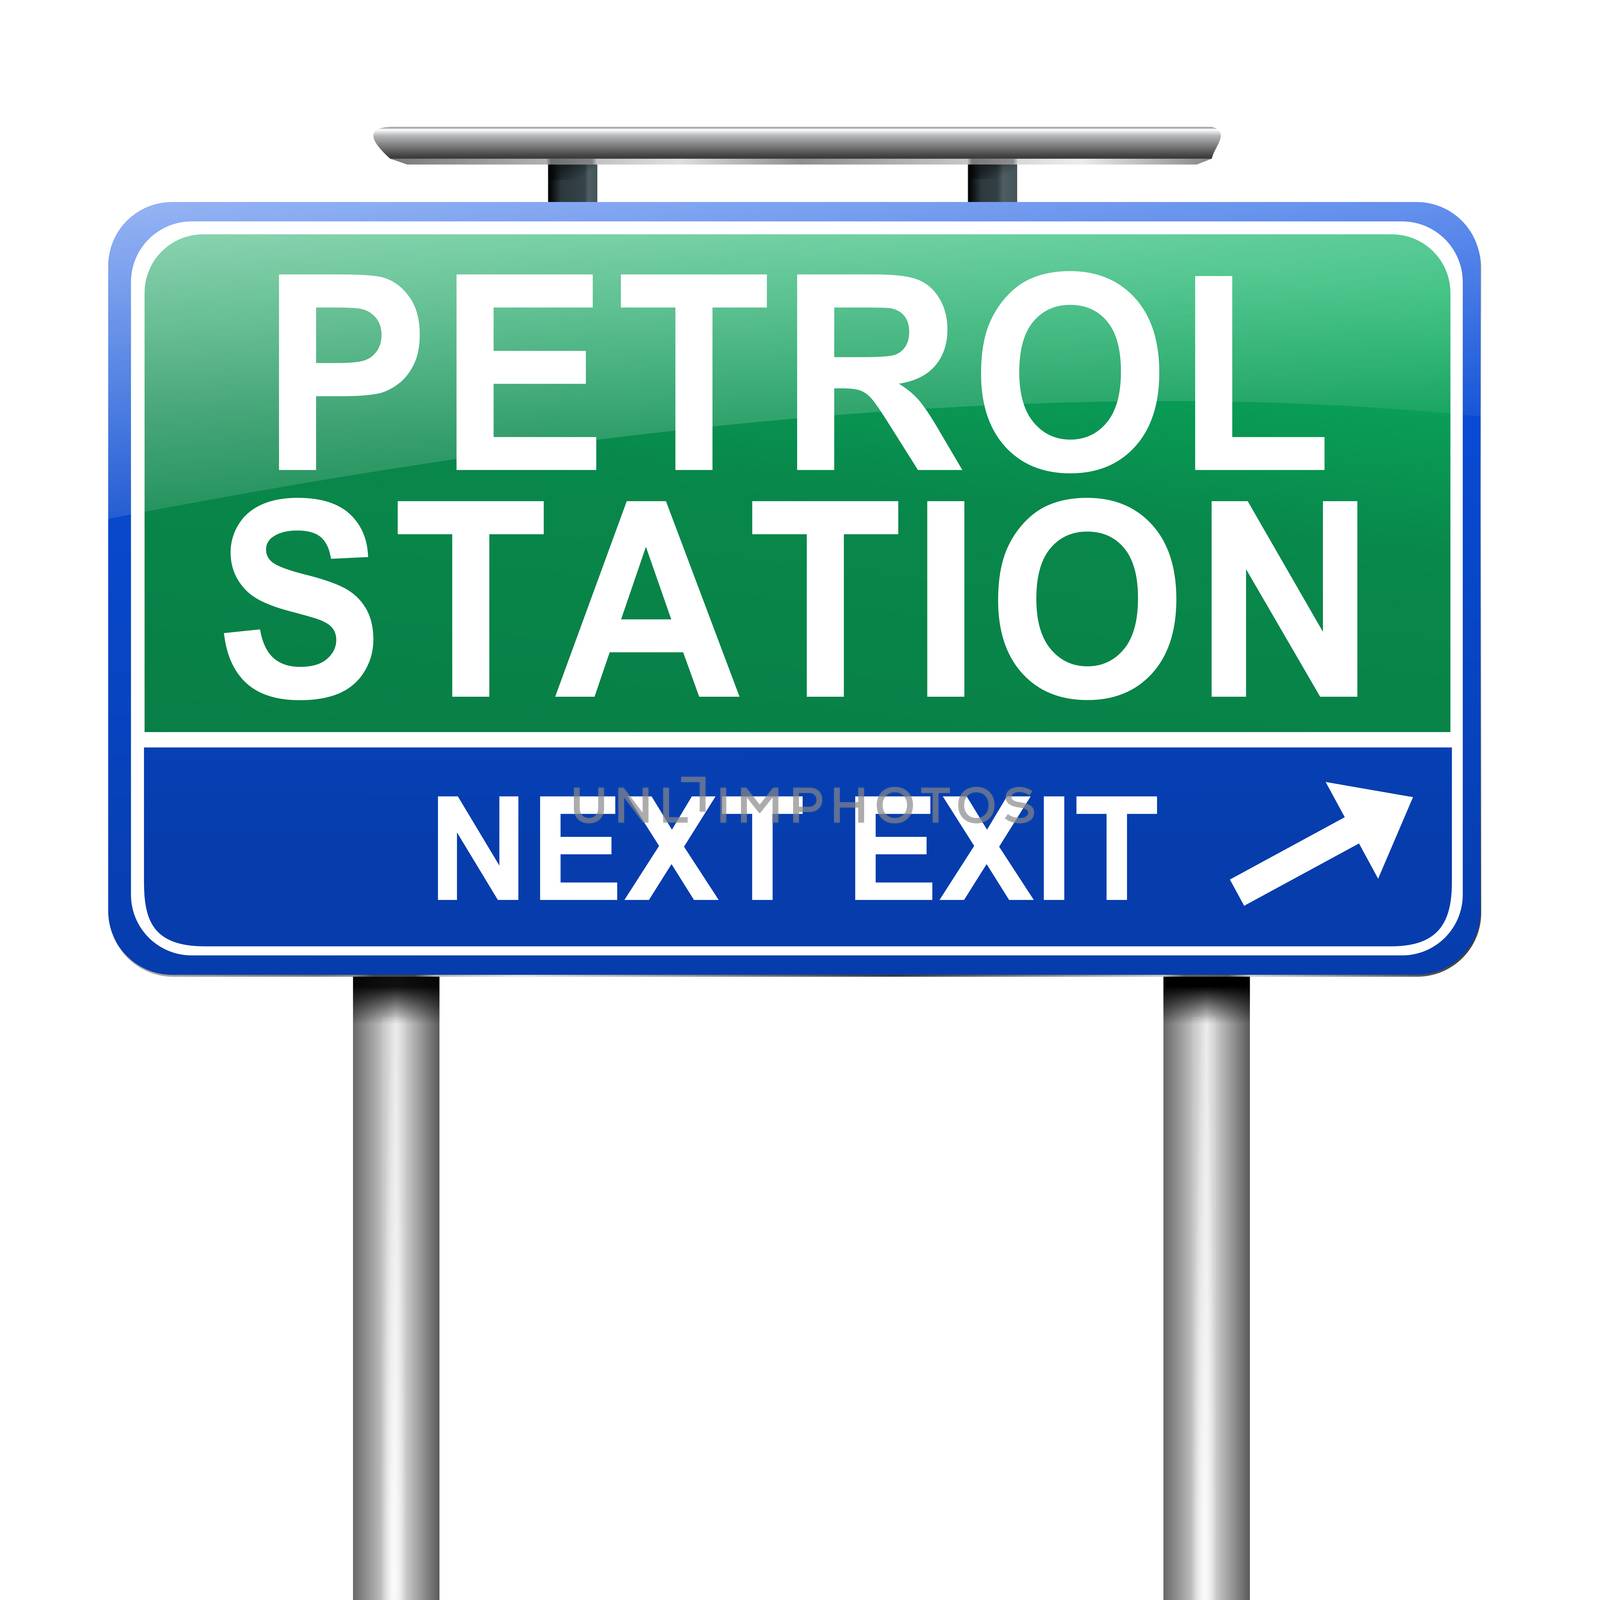 Petrol station sign. by 72soul